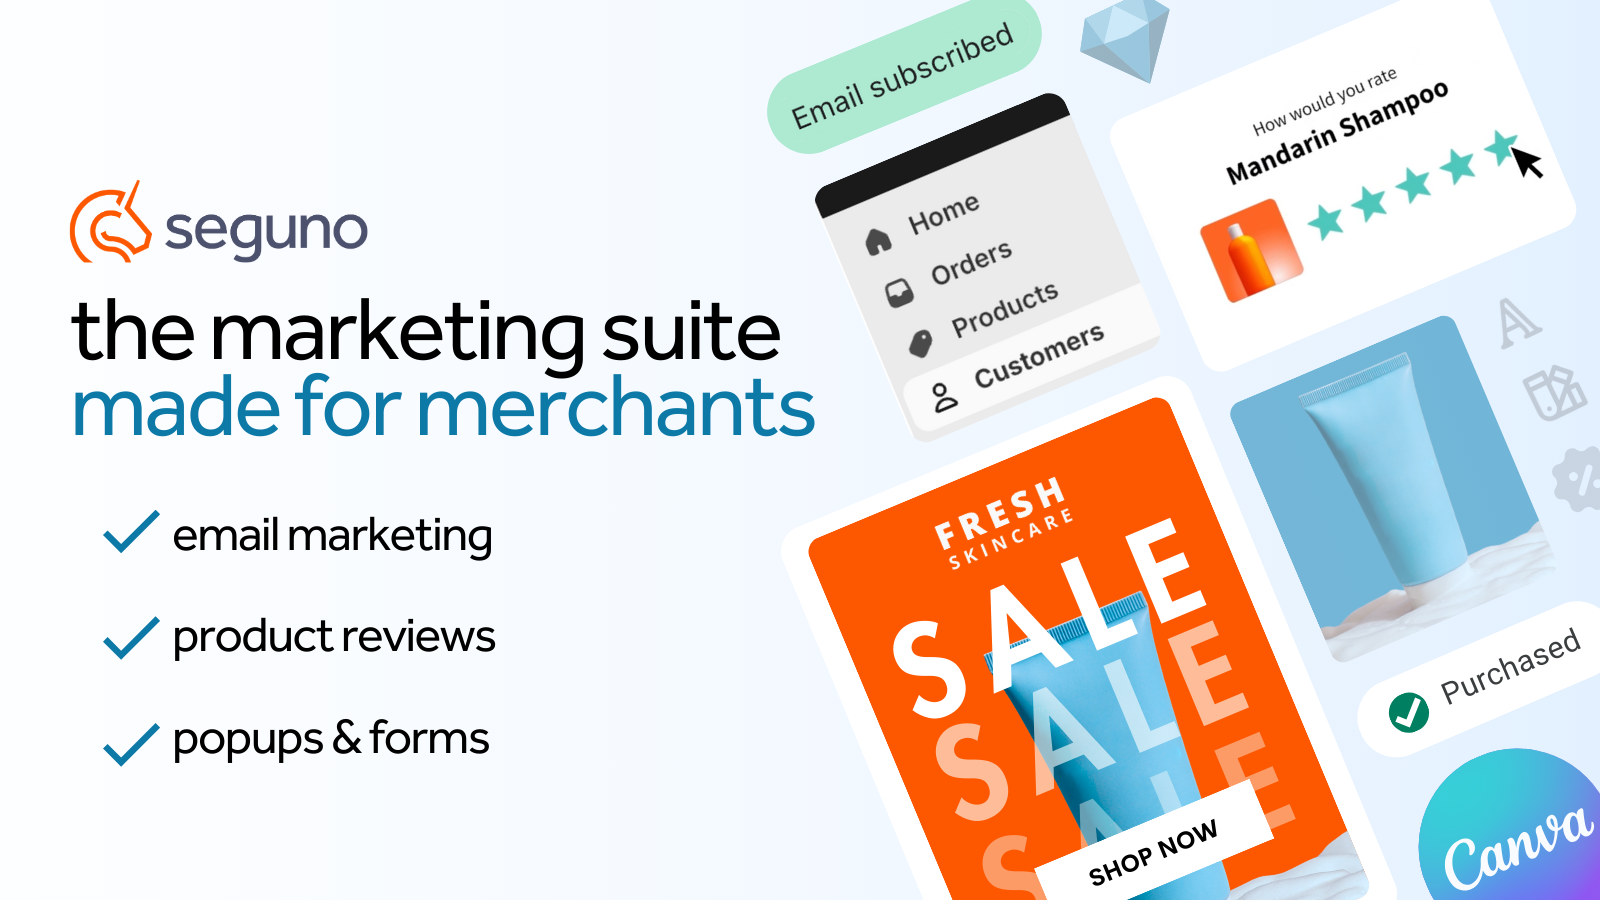 Seguno Marketing Suite: email marketing, product reviews, popups